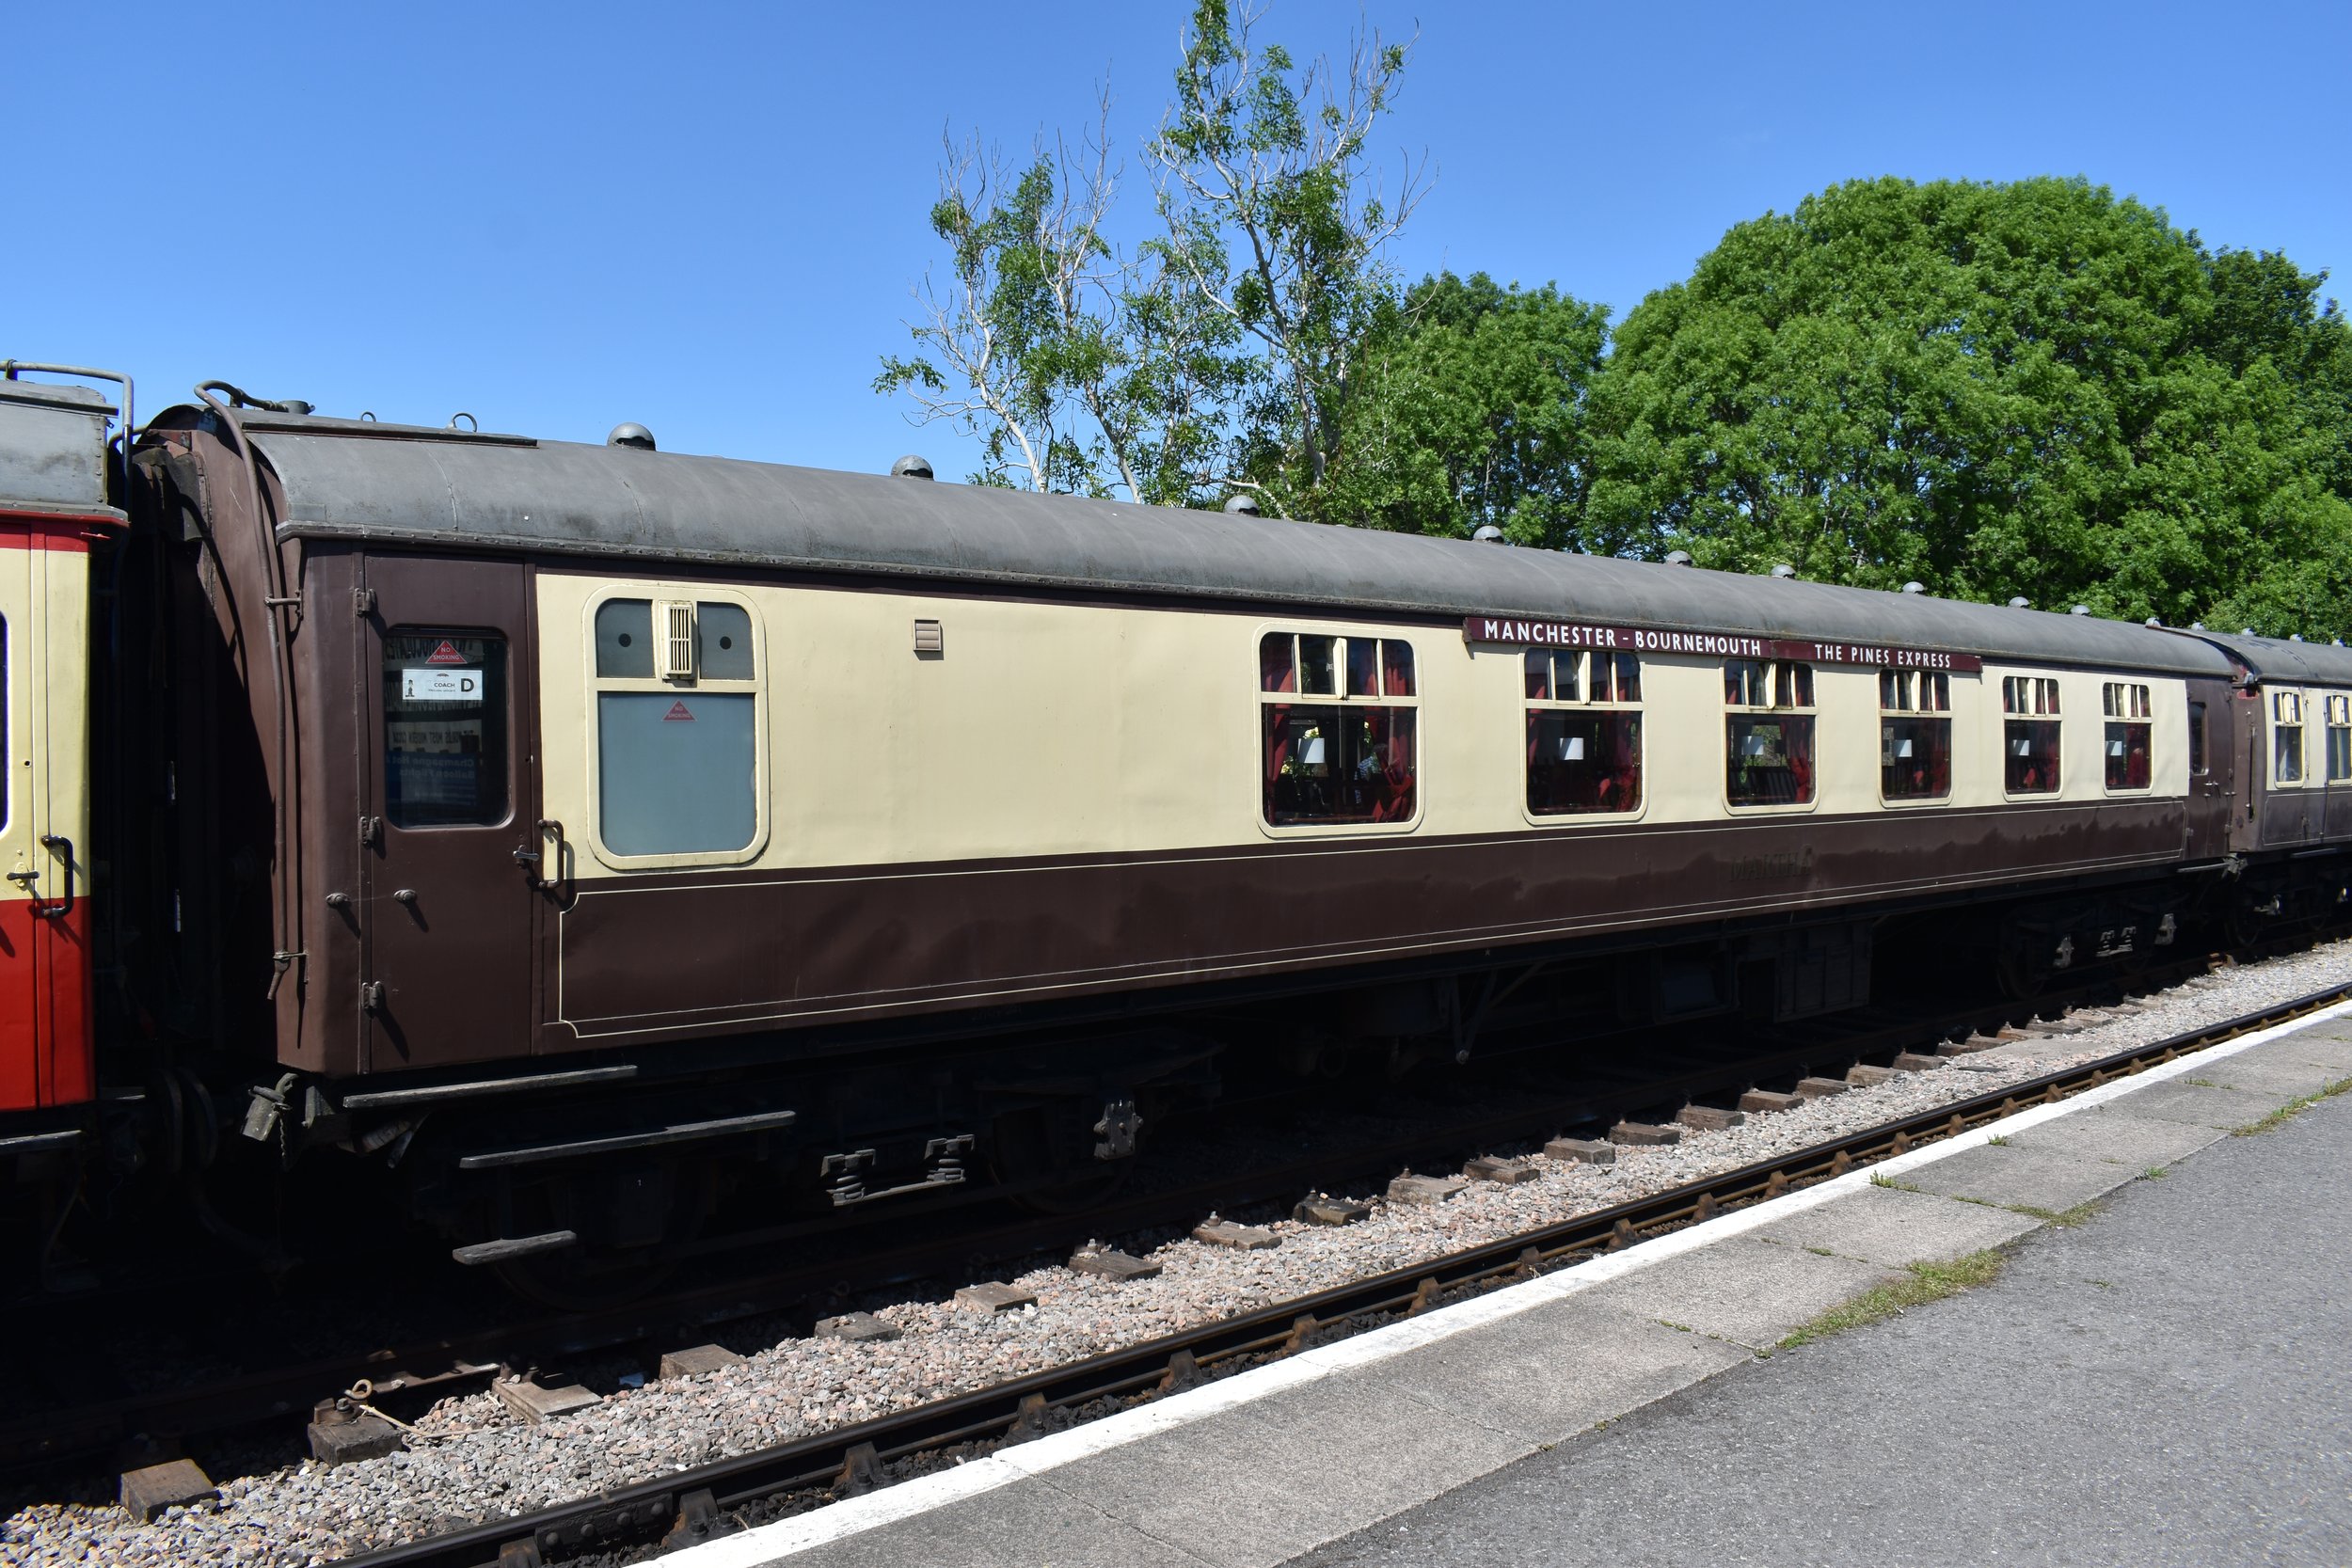 13231 at Bitton in June 2021. 13231 is seen at Bitton in May 2010&nbsp;© A Bryant